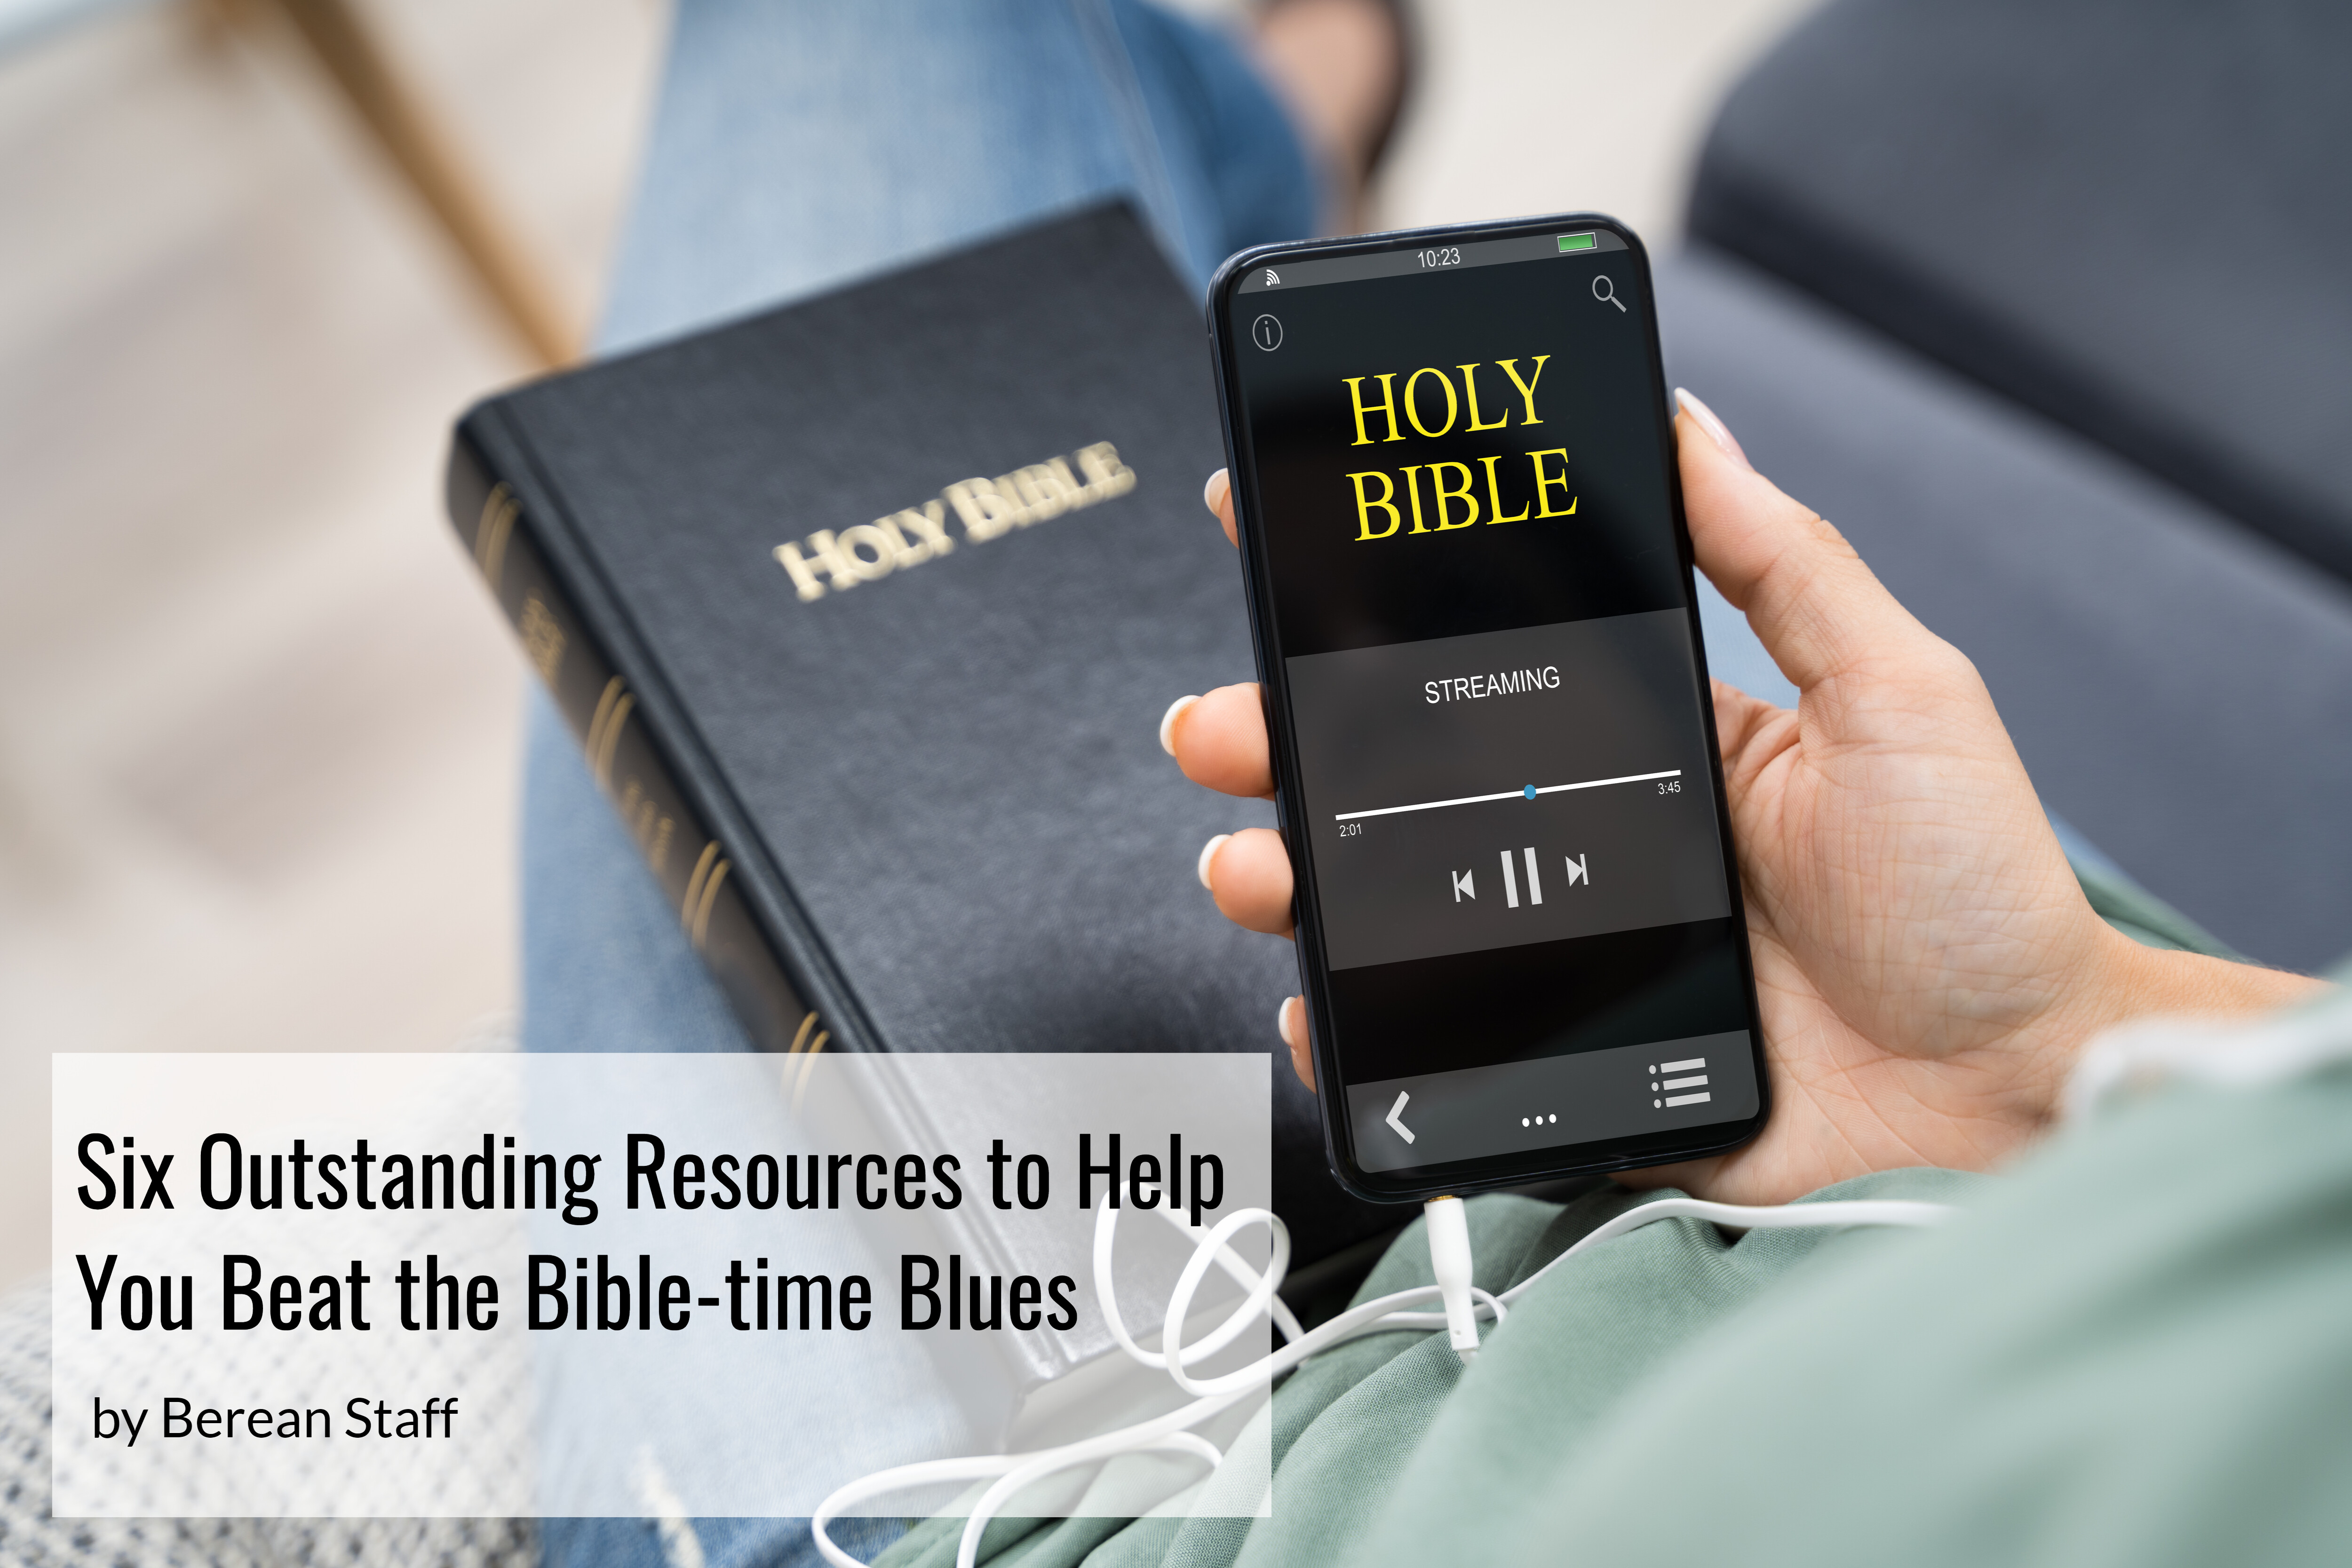 Six Outstanding Resources to Help You Beat the Bible-Time Blues